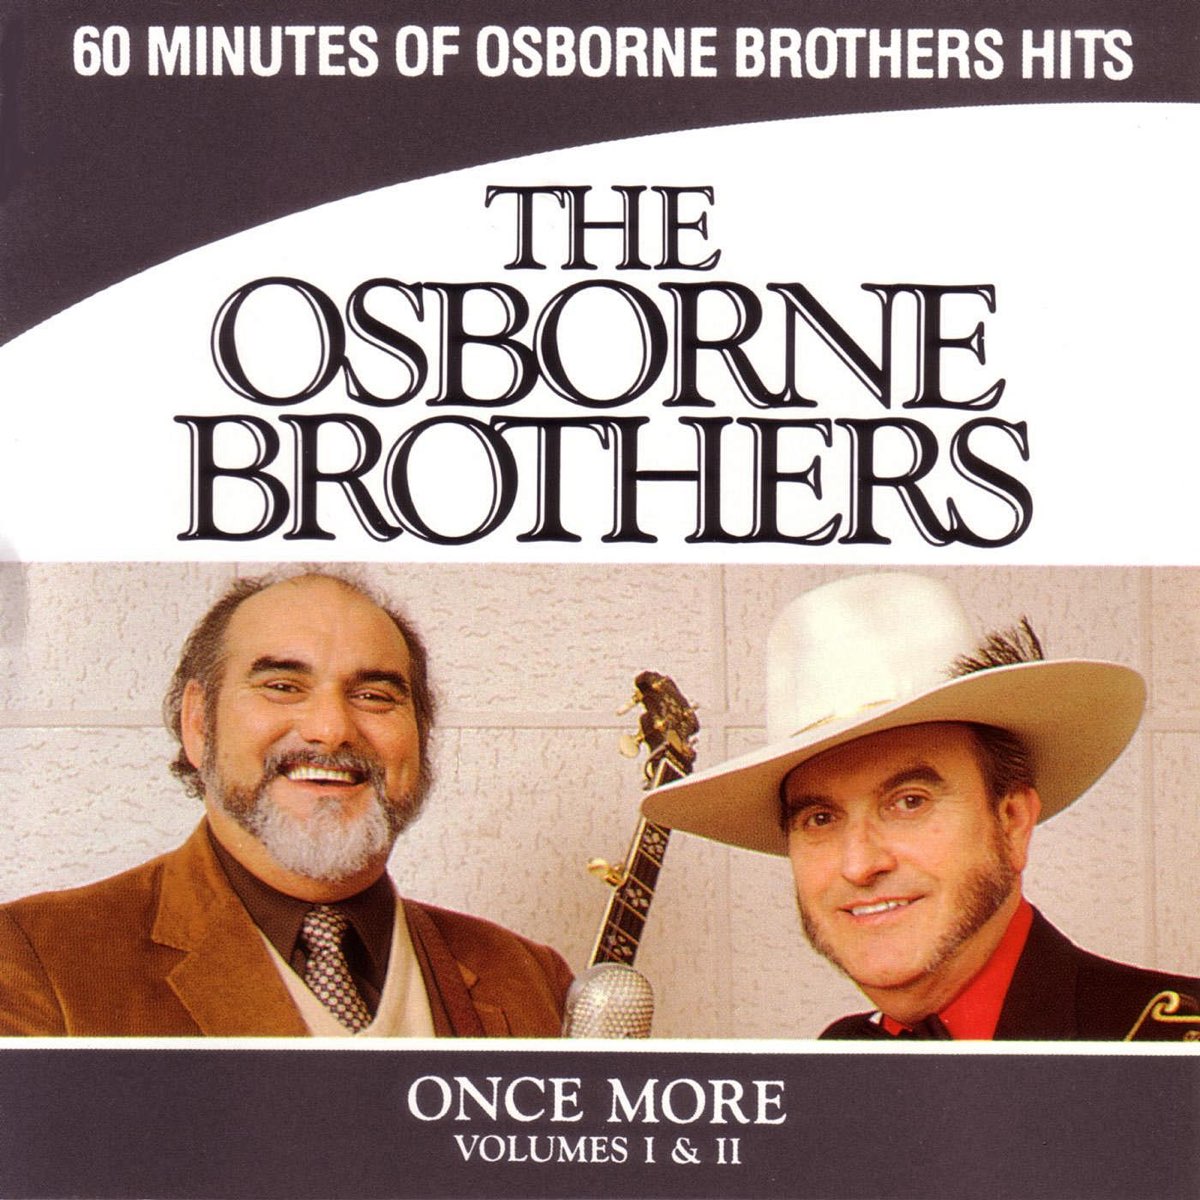 Brothers Osborne. Brothers of the Wind 2015. Once brothers